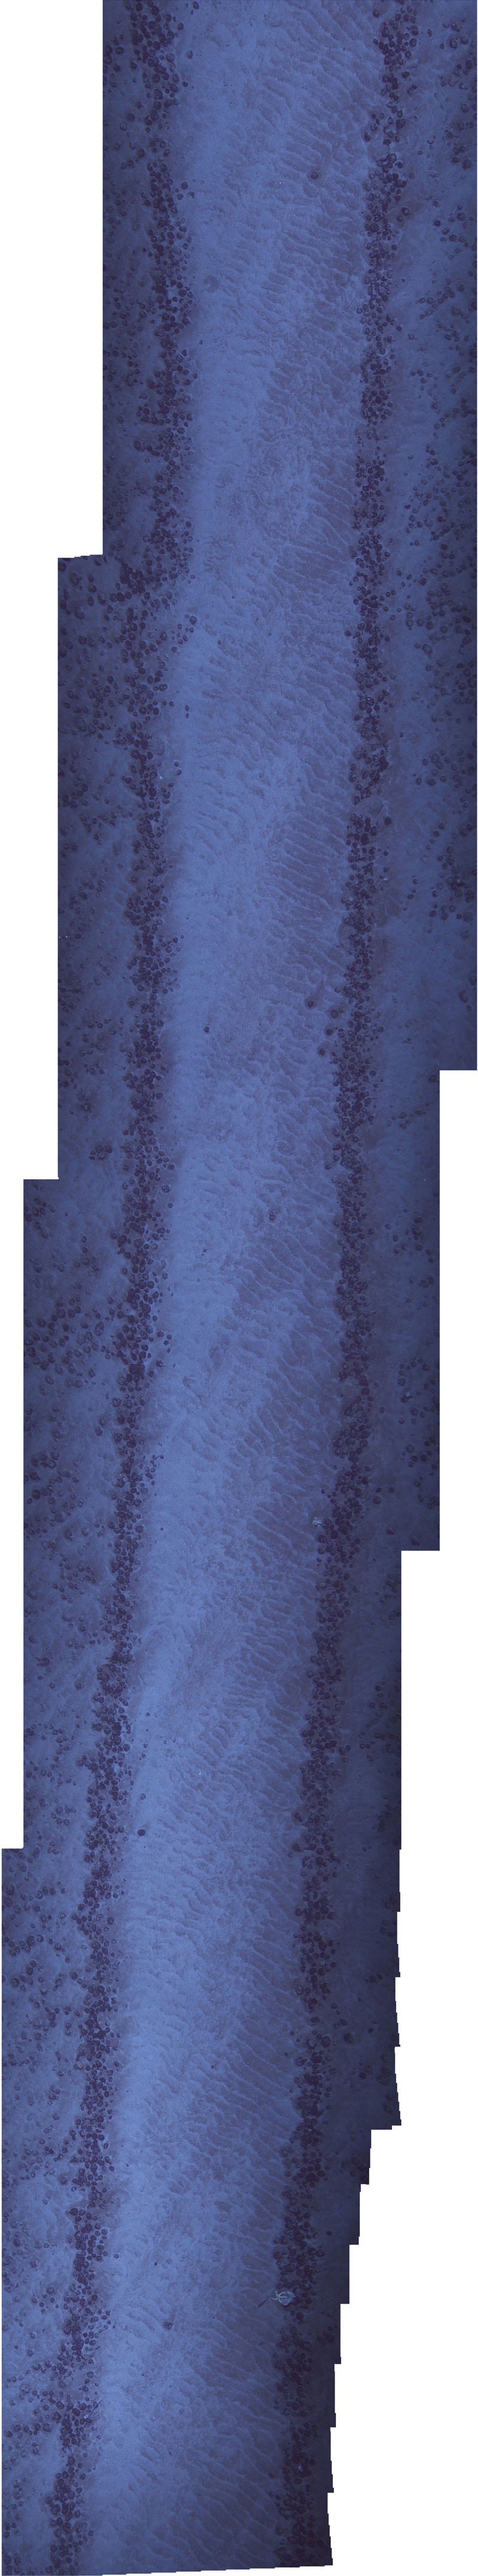 Seafloor disturbance is evident in this photomosaic, which represents a section of seafloor about 8-by-26 meters (26-by-85 feet) in size. It’s a fraction of the many kilometers of disturbance observed during 2022’s Investigation of an Historic Seabed Mining Test Site on the Blake Plateau.